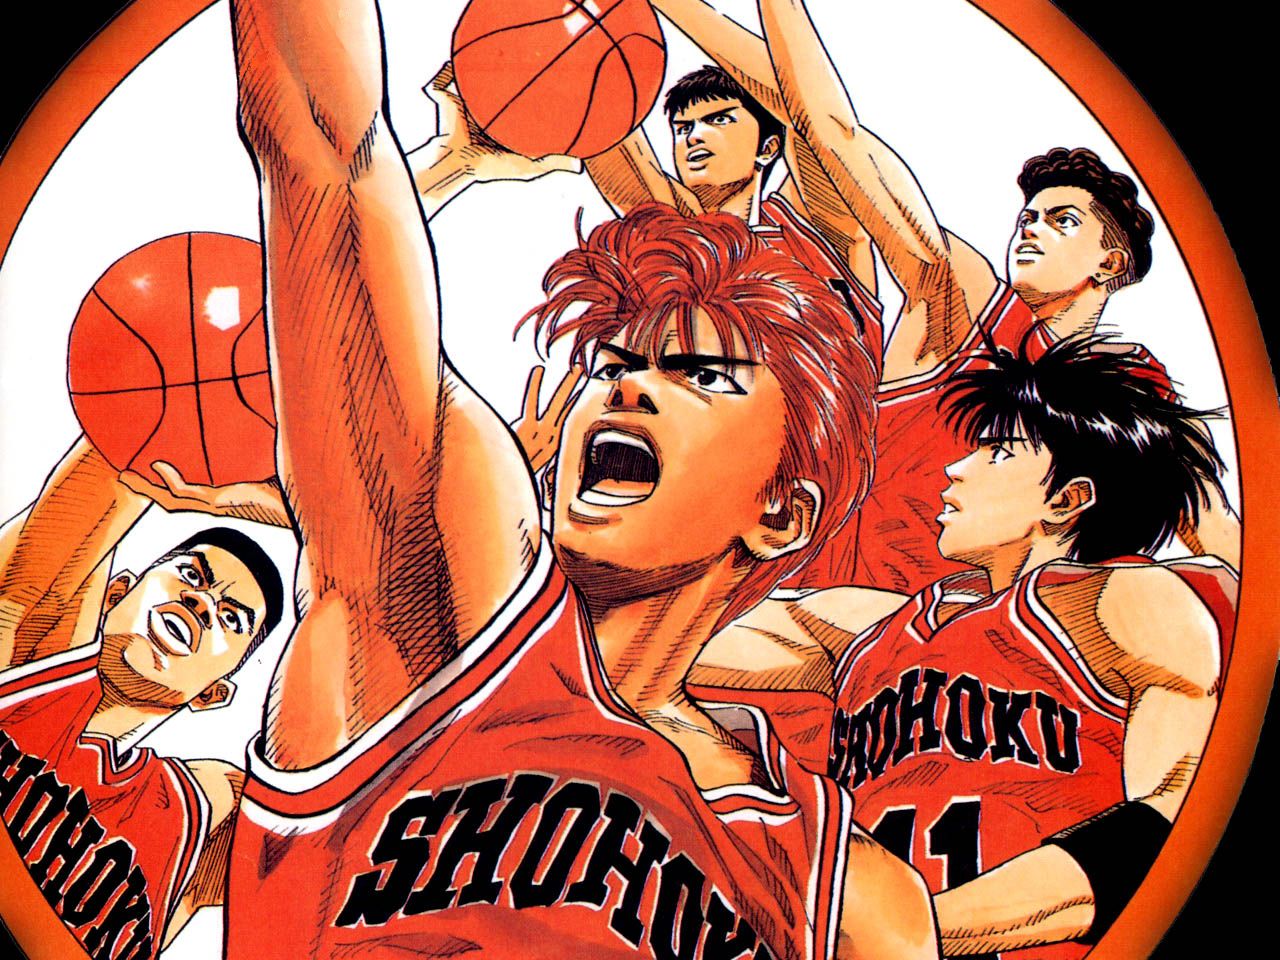 Slam Dunk and Scan Gallery